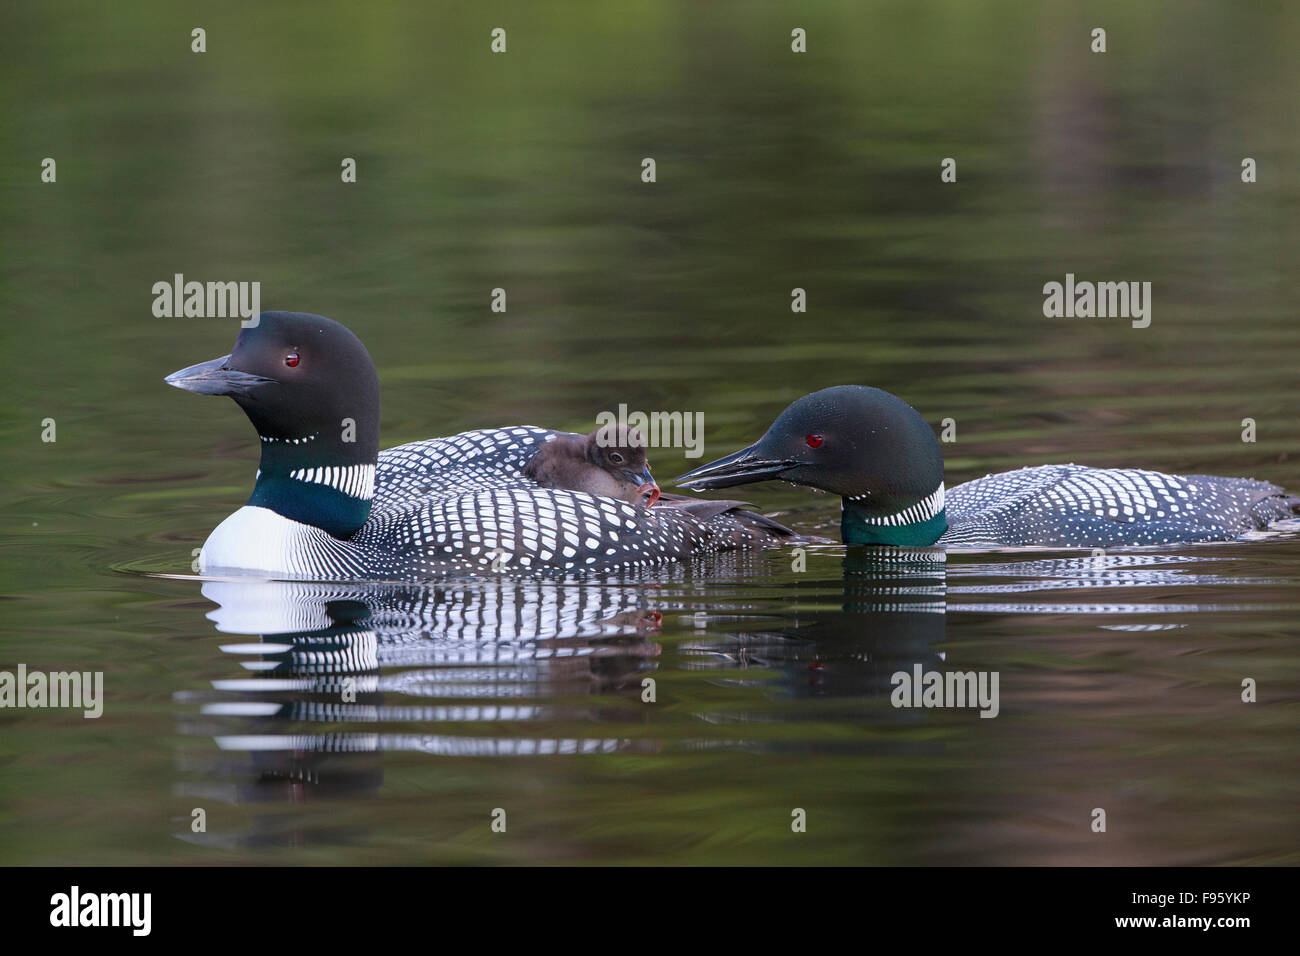 Common loon (Gavia immer), adult feeding leech (Class Hirudinea) to chick riding on the other adult's back,  Lac Le Jeune, Stock Photo